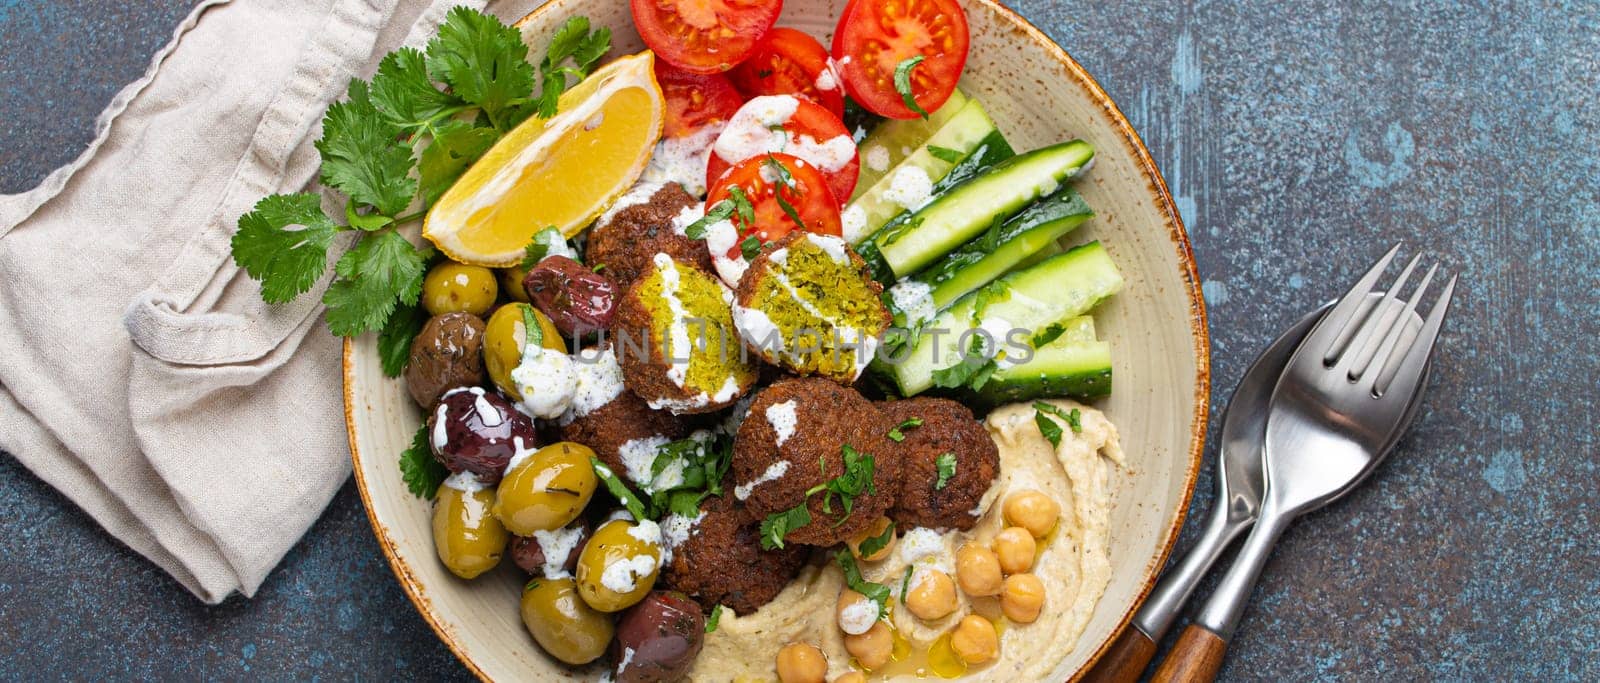 Falafel salad bowl with hummus, vegetables, olives, herbs and yogurt sauce. Vegan lunch plate top view on rustic stone background, healthy meal with falafel and veggies